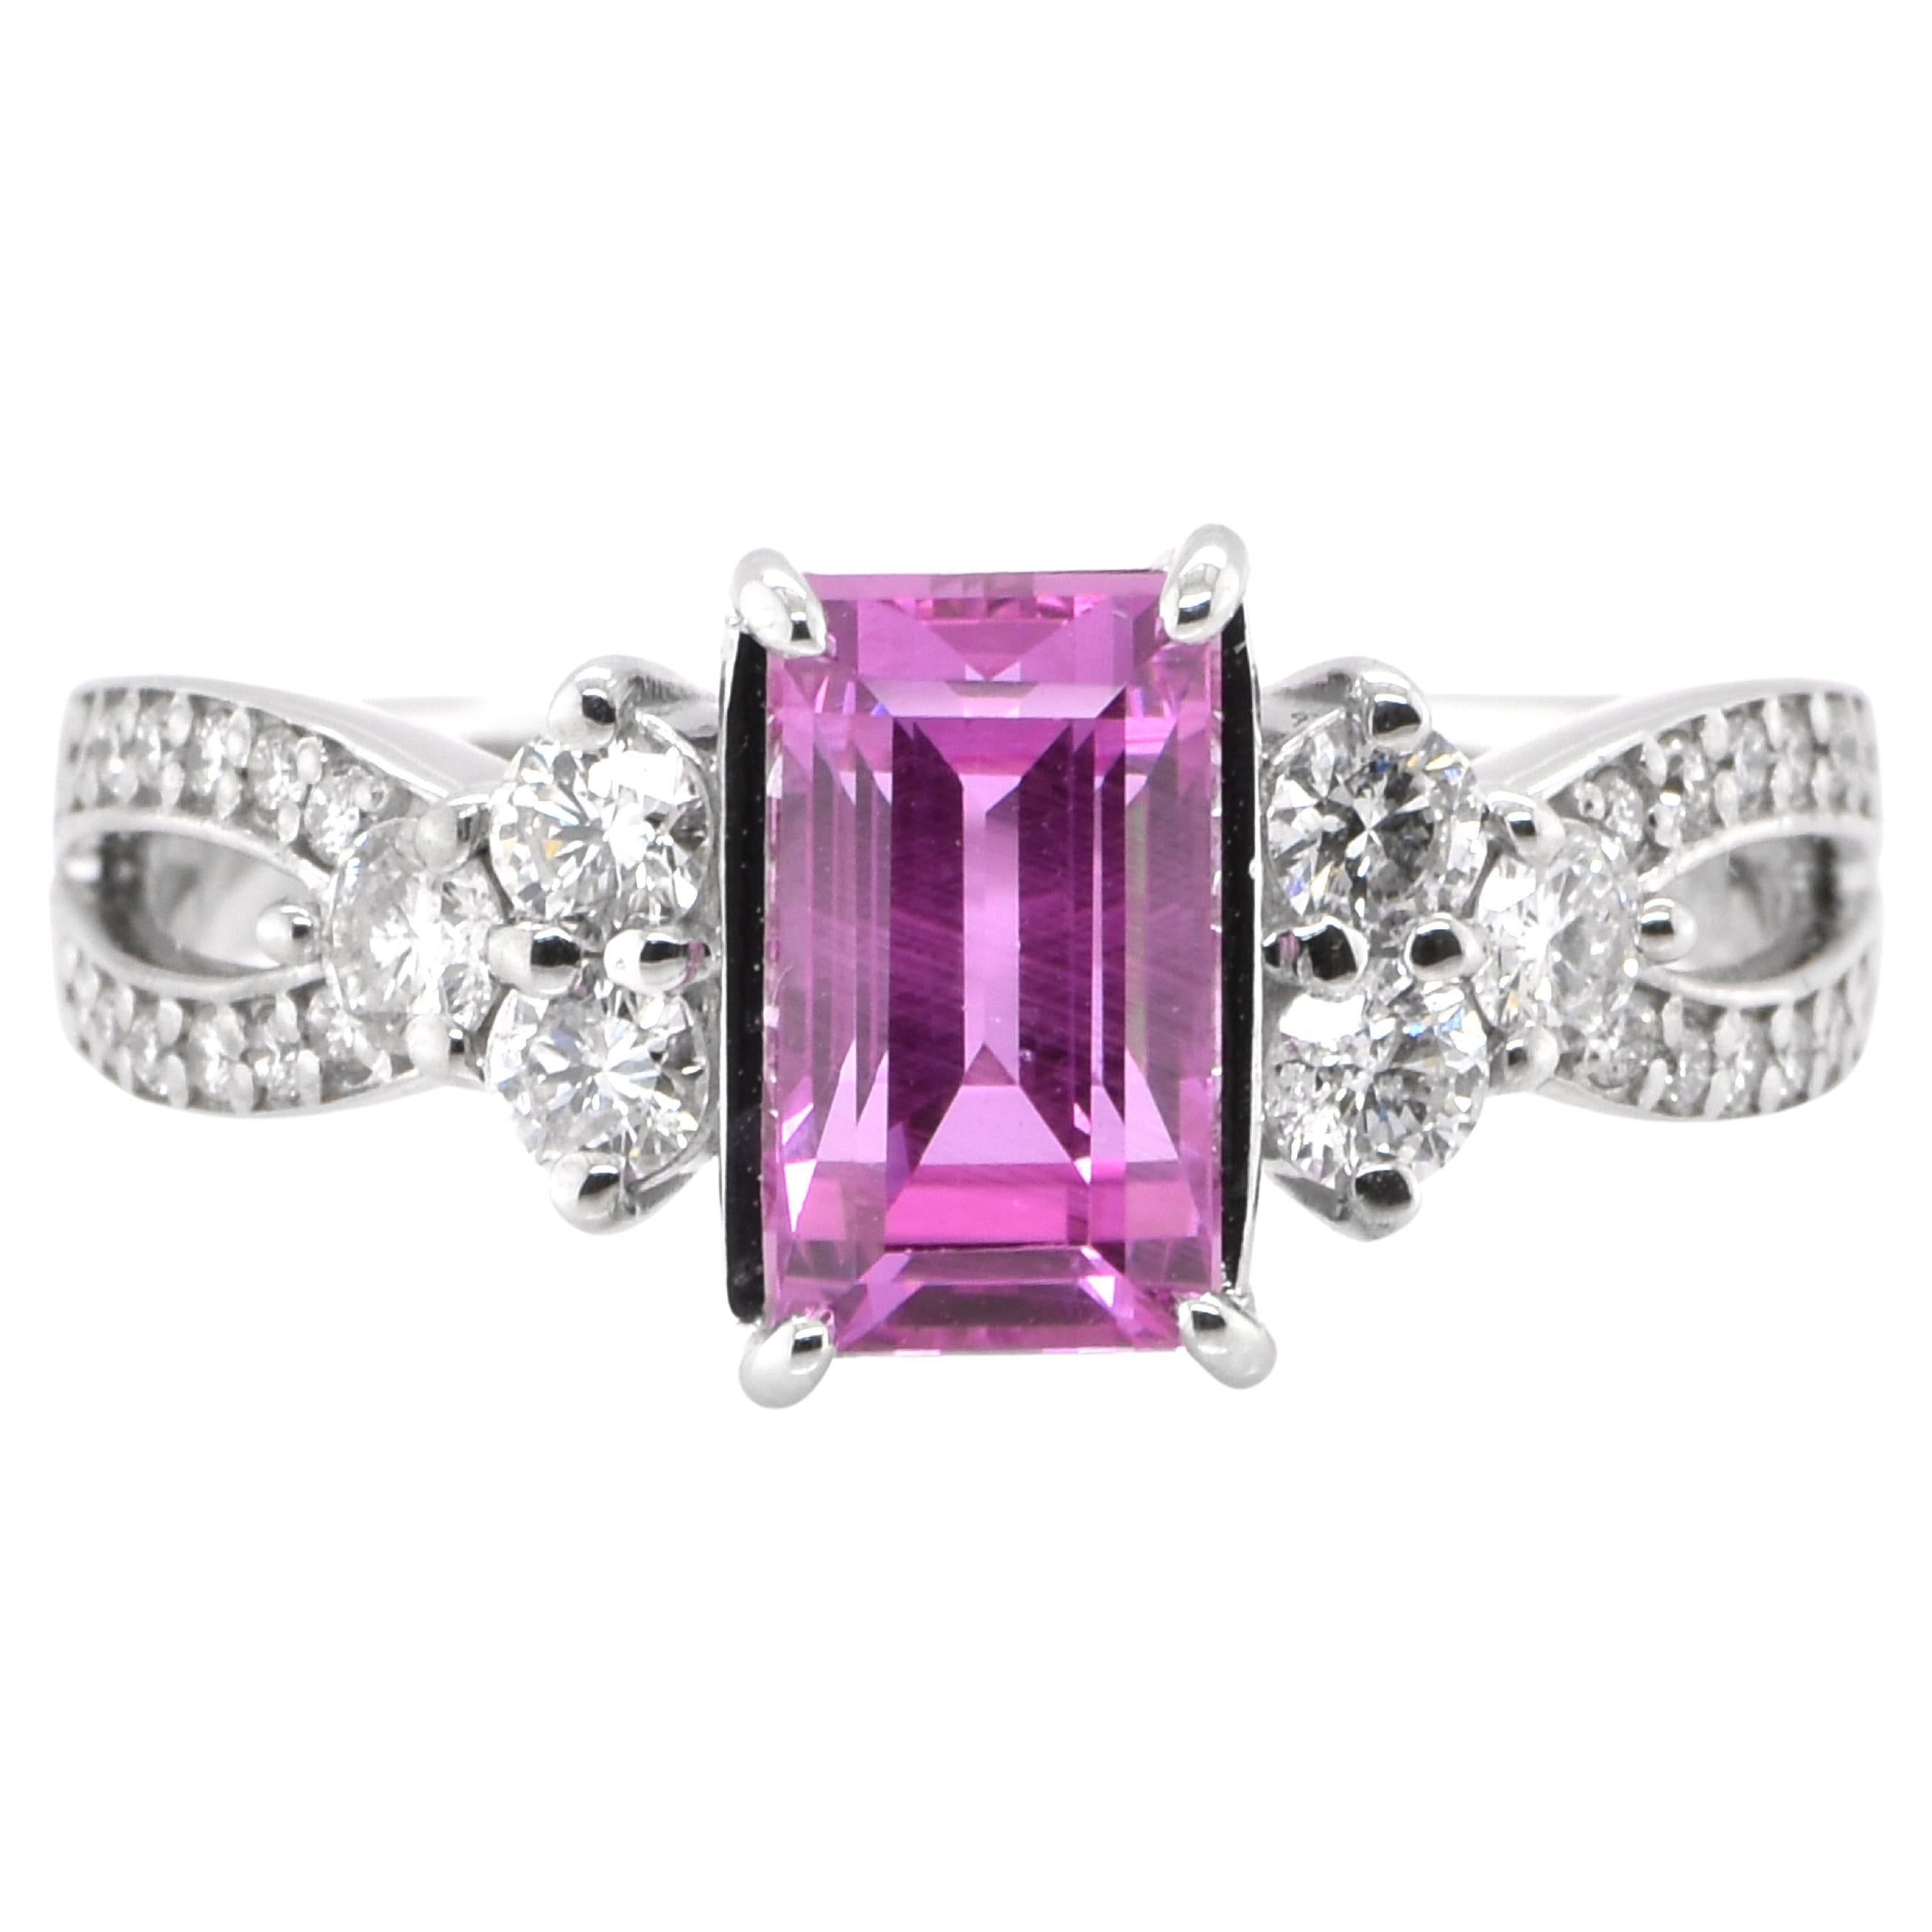 GIA Certified 2.56 Carat Natural Pink Sapphire and Diamond Ring Set in Platinum